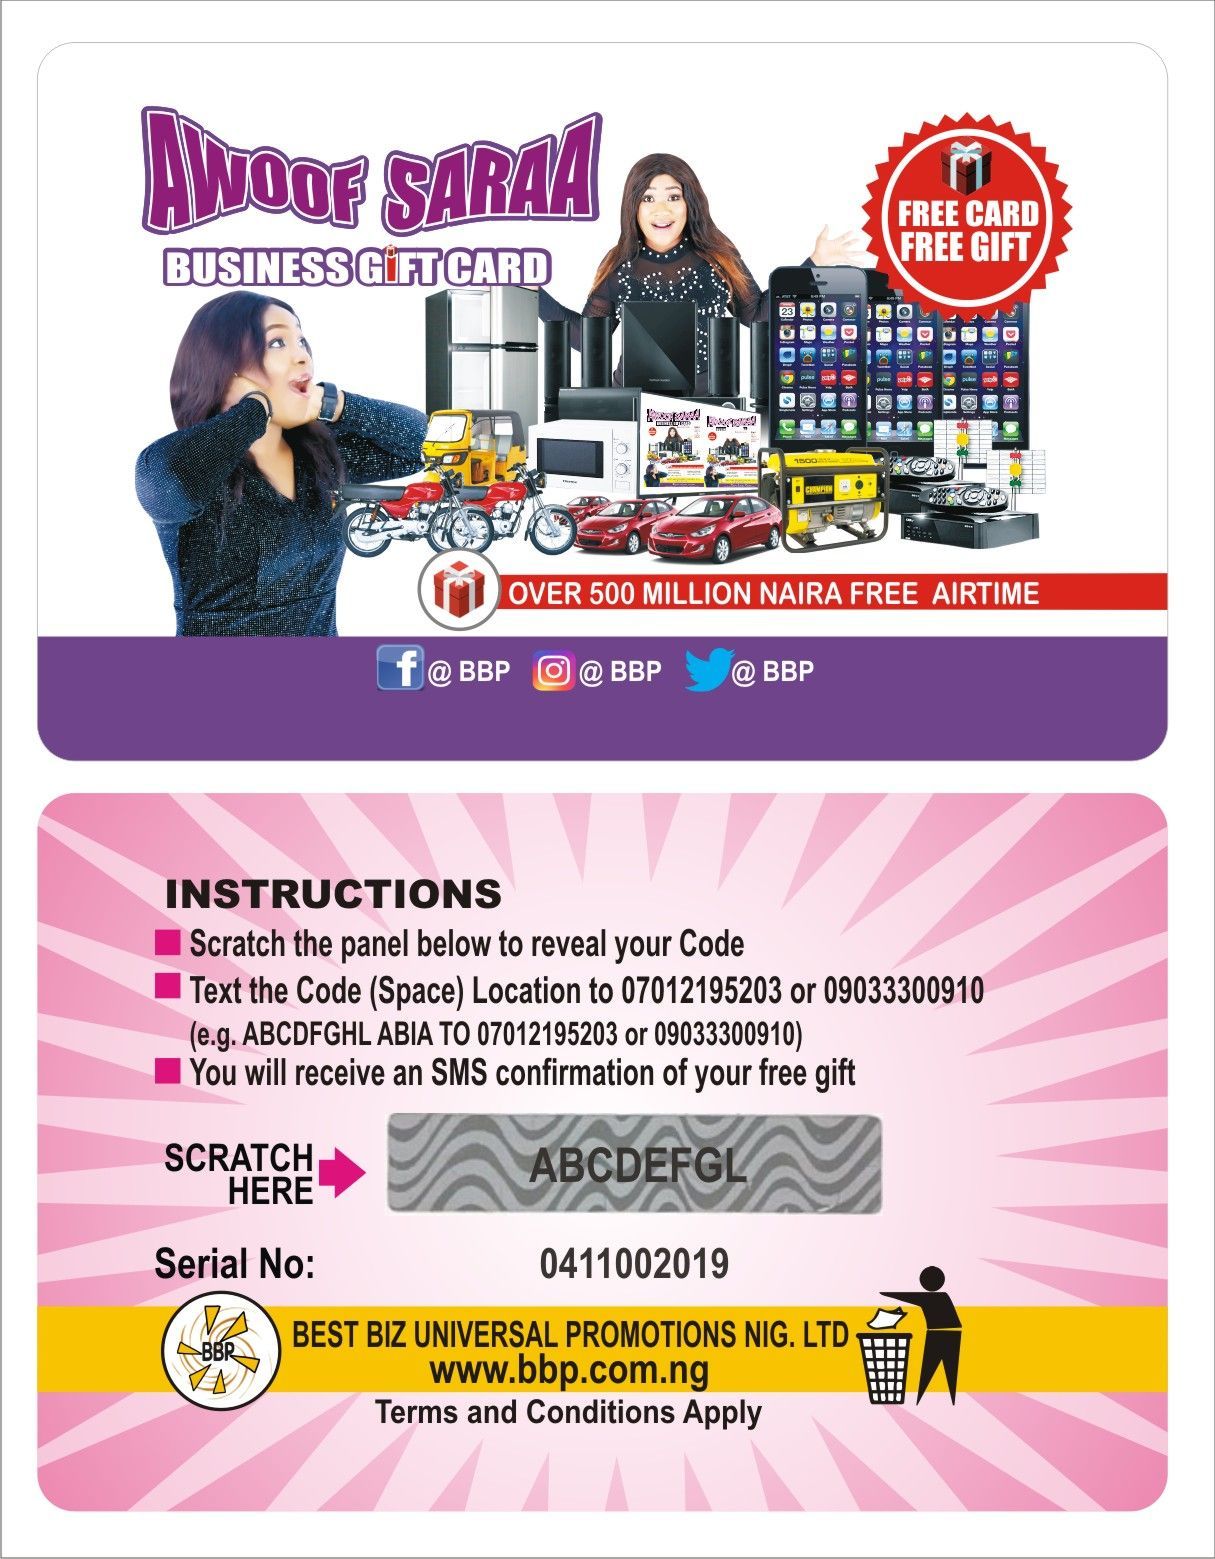 CALL EMMANUEL ON 08176499649 TO PRINT ALL SCRATCH CARDS FOR ALL PURPOSE